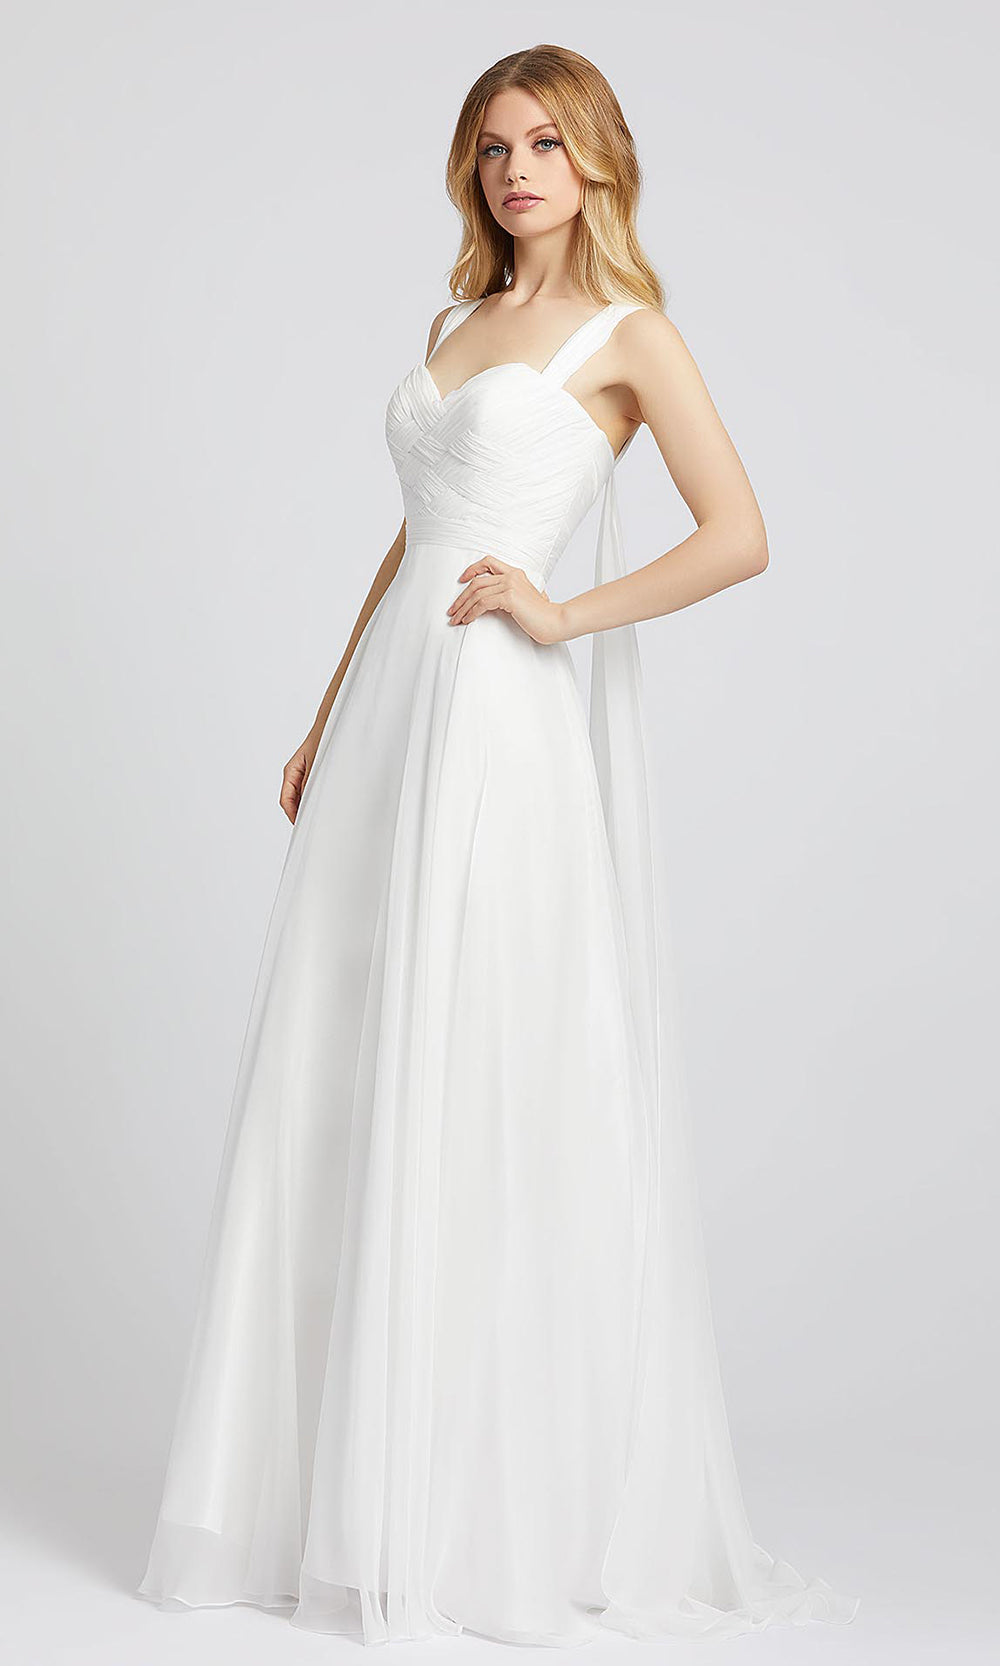 Mac Duggal - 67132L Sleeveless Sweetheart Neck Chiffon Gown In White & Ivory